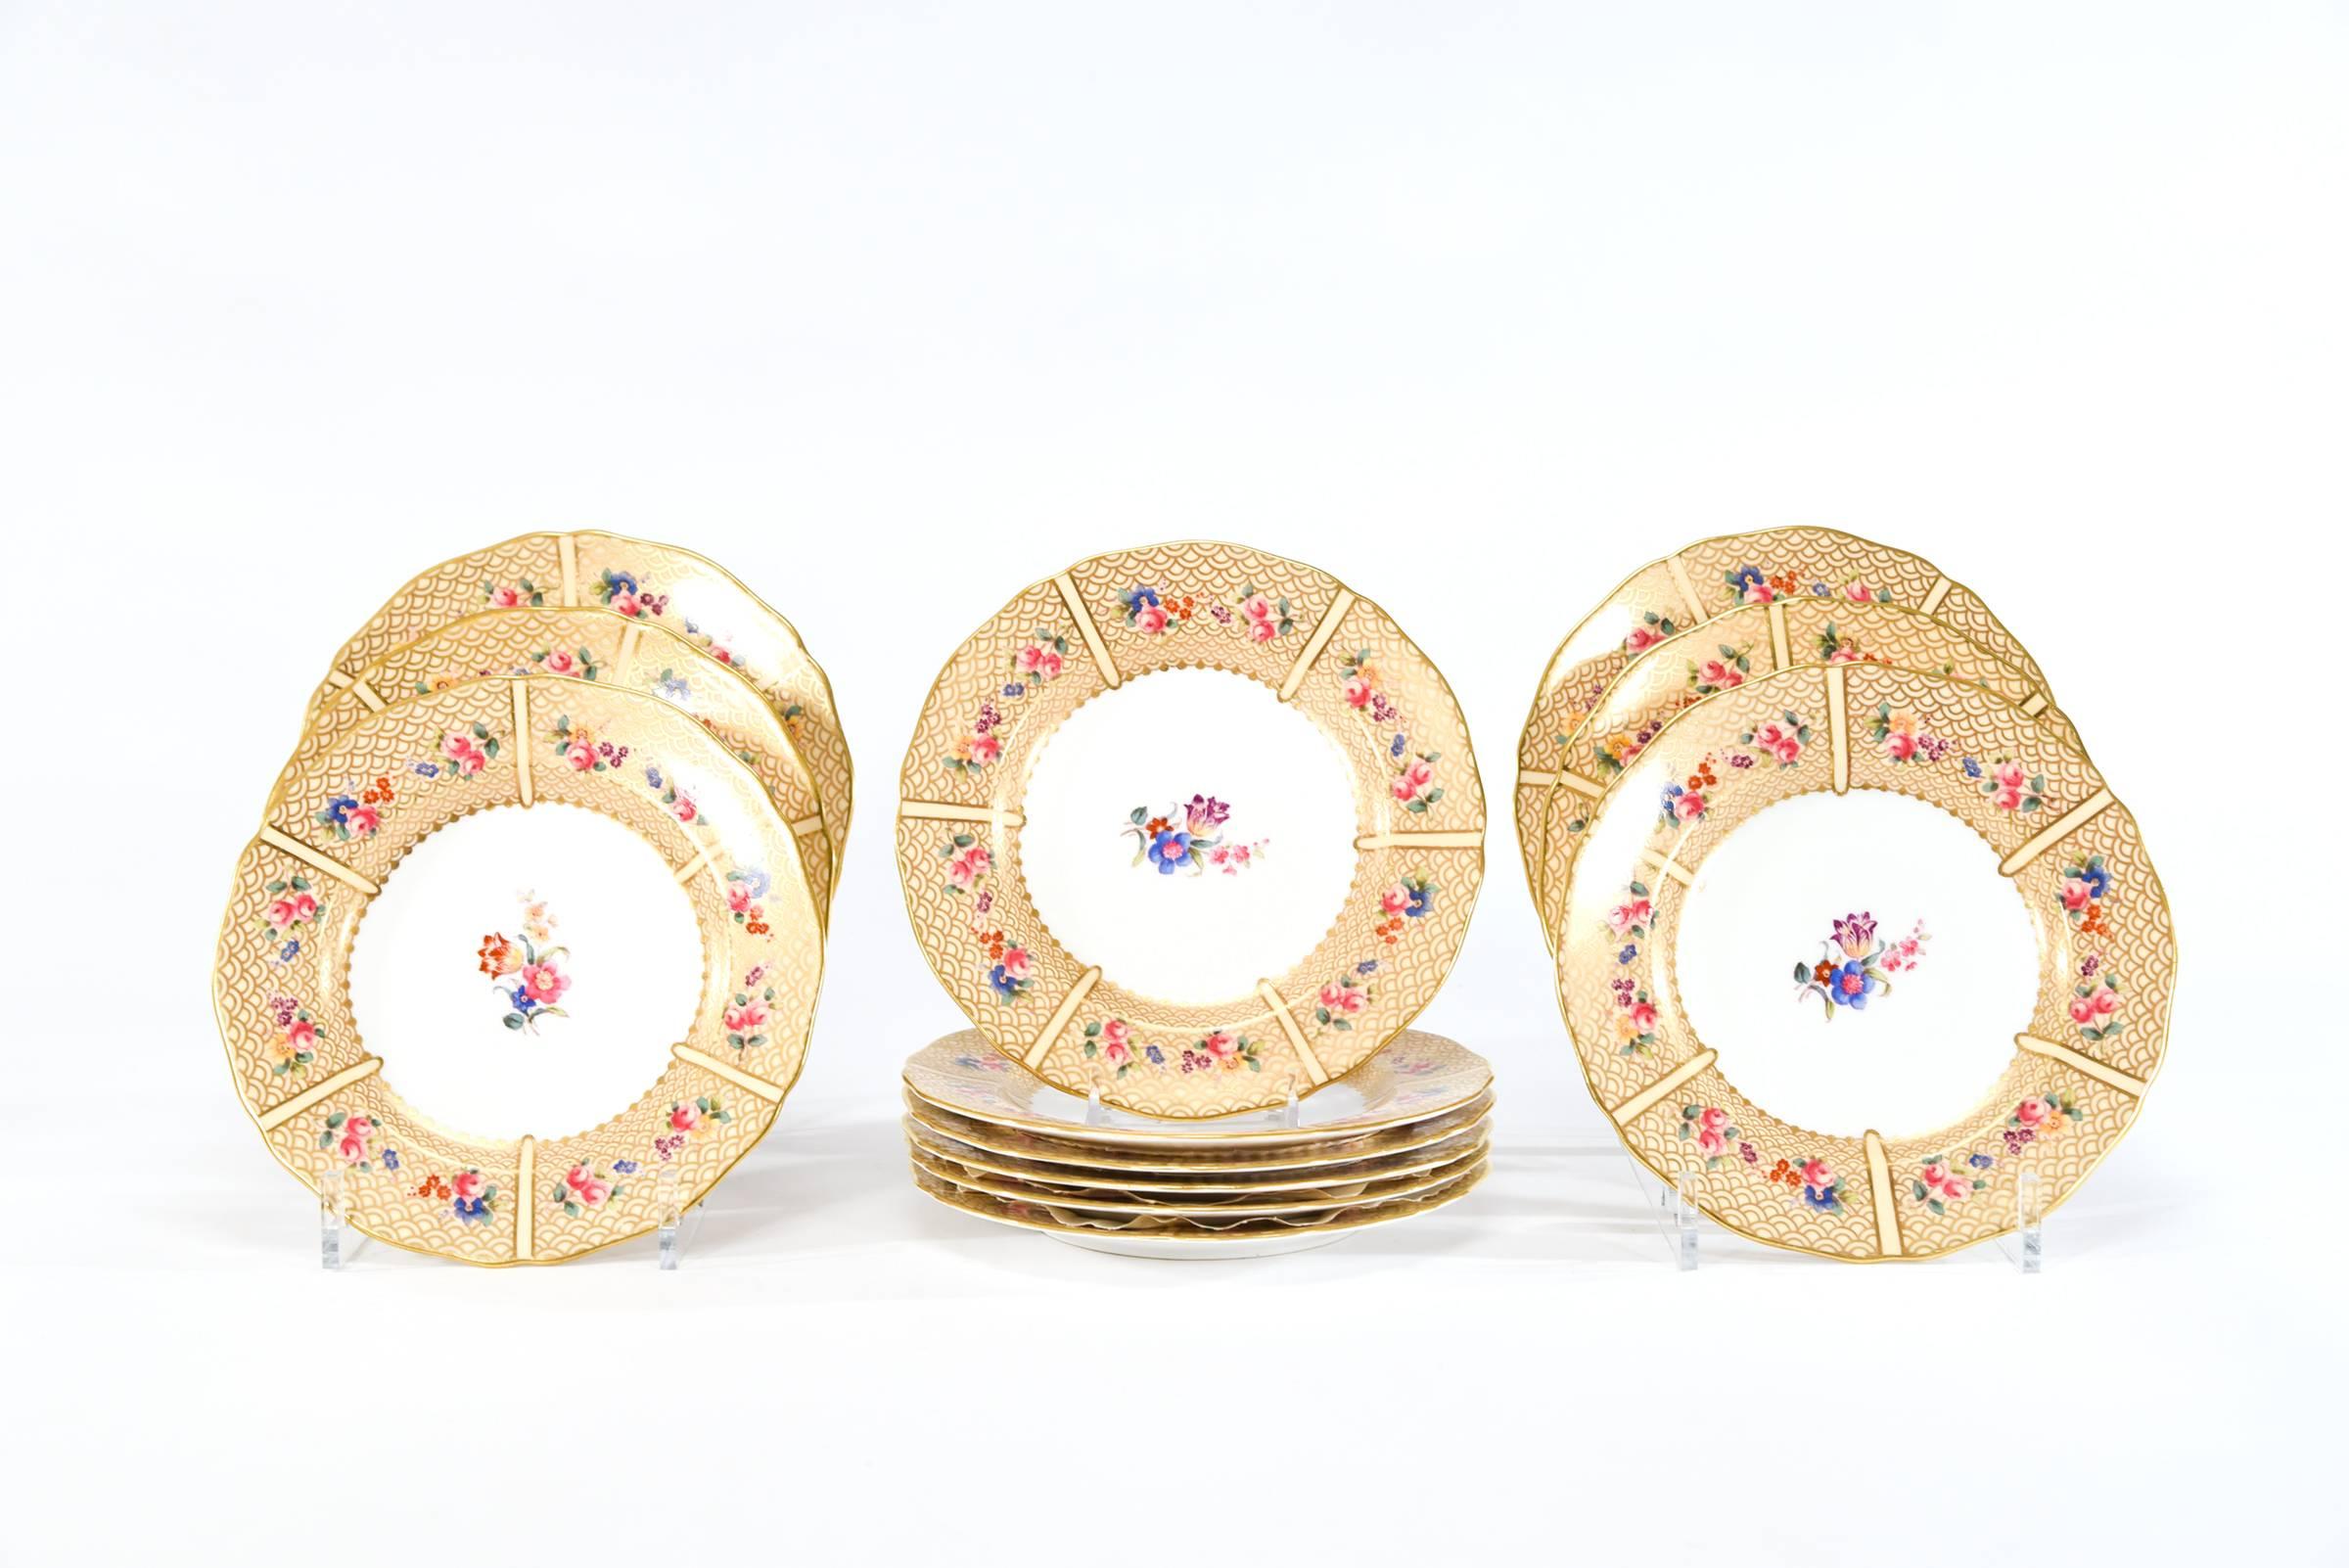 This is a complete dessert service for 12 that includes the matching coffee or teapot, creamer and sugar made by Copeland Spode, exclusively for Tiffany and Co.
The butterscotch colored enamel border is decorated with a series of multicolor flowers